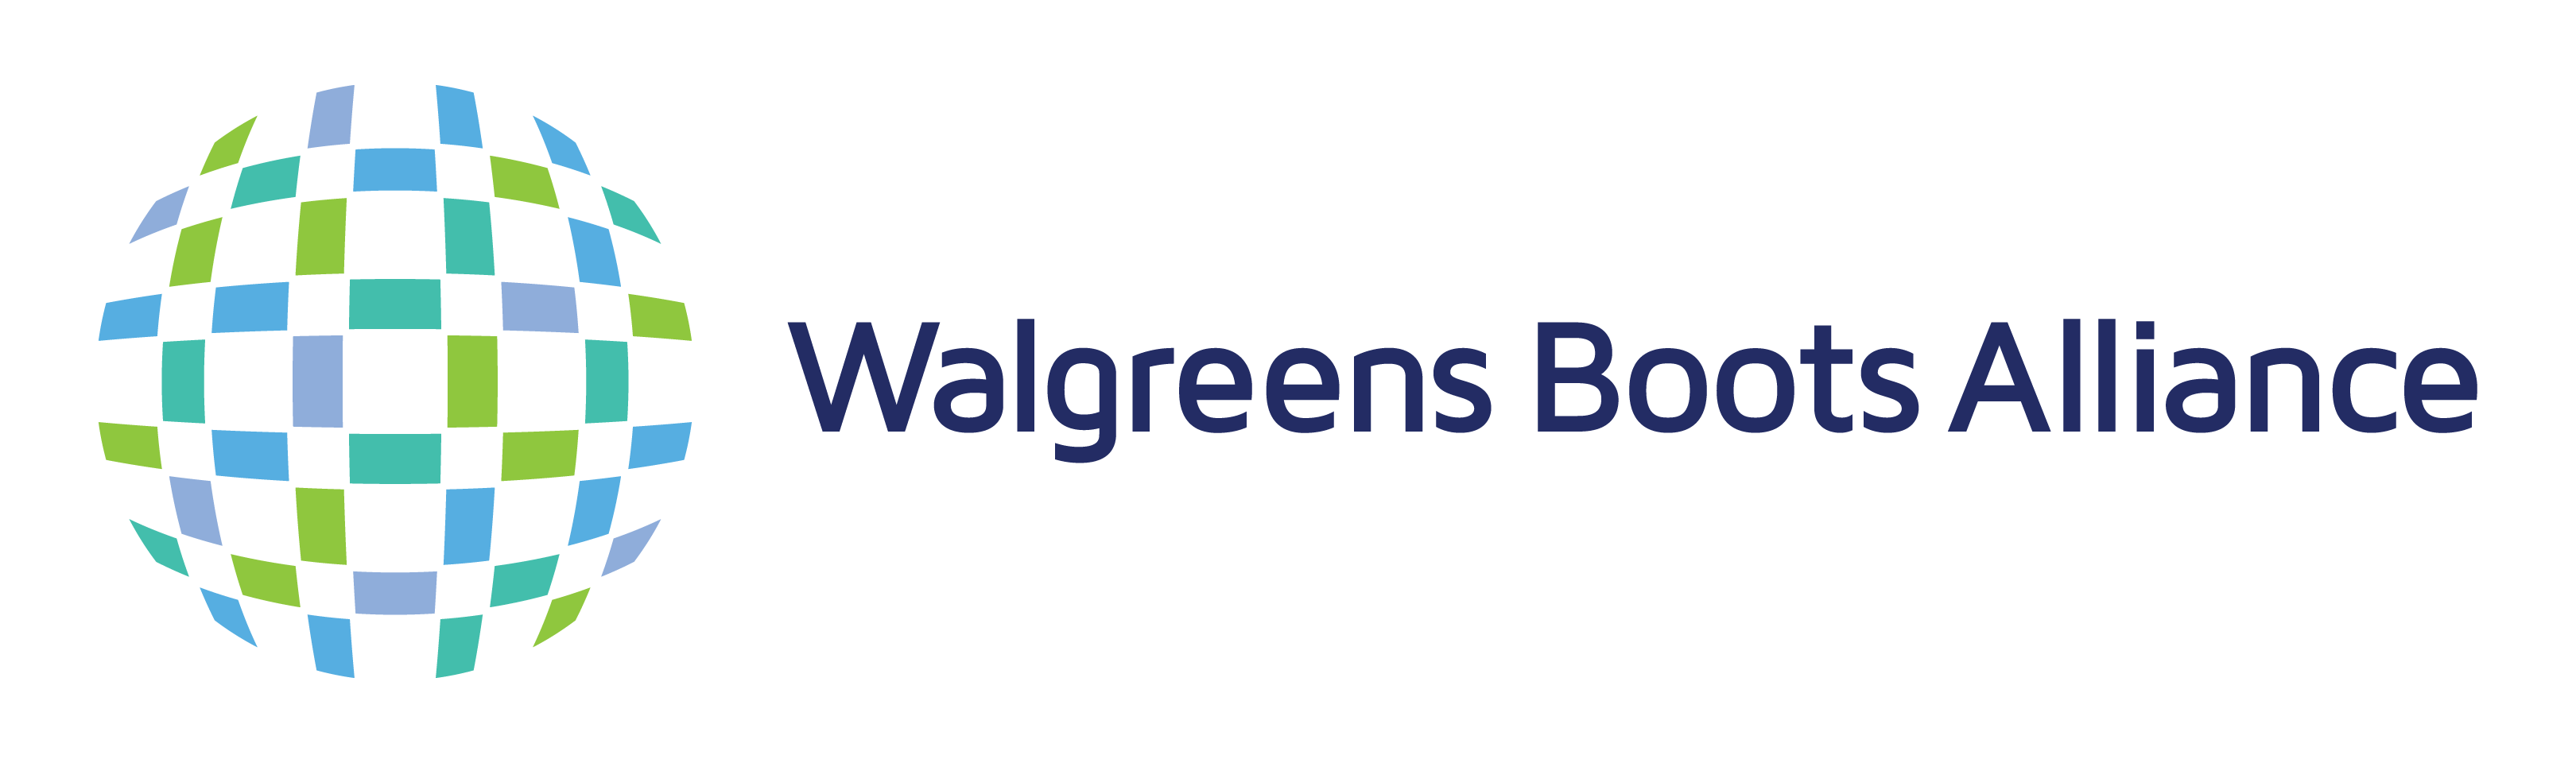 Walgreens Boots Alliance Logo PNG Image